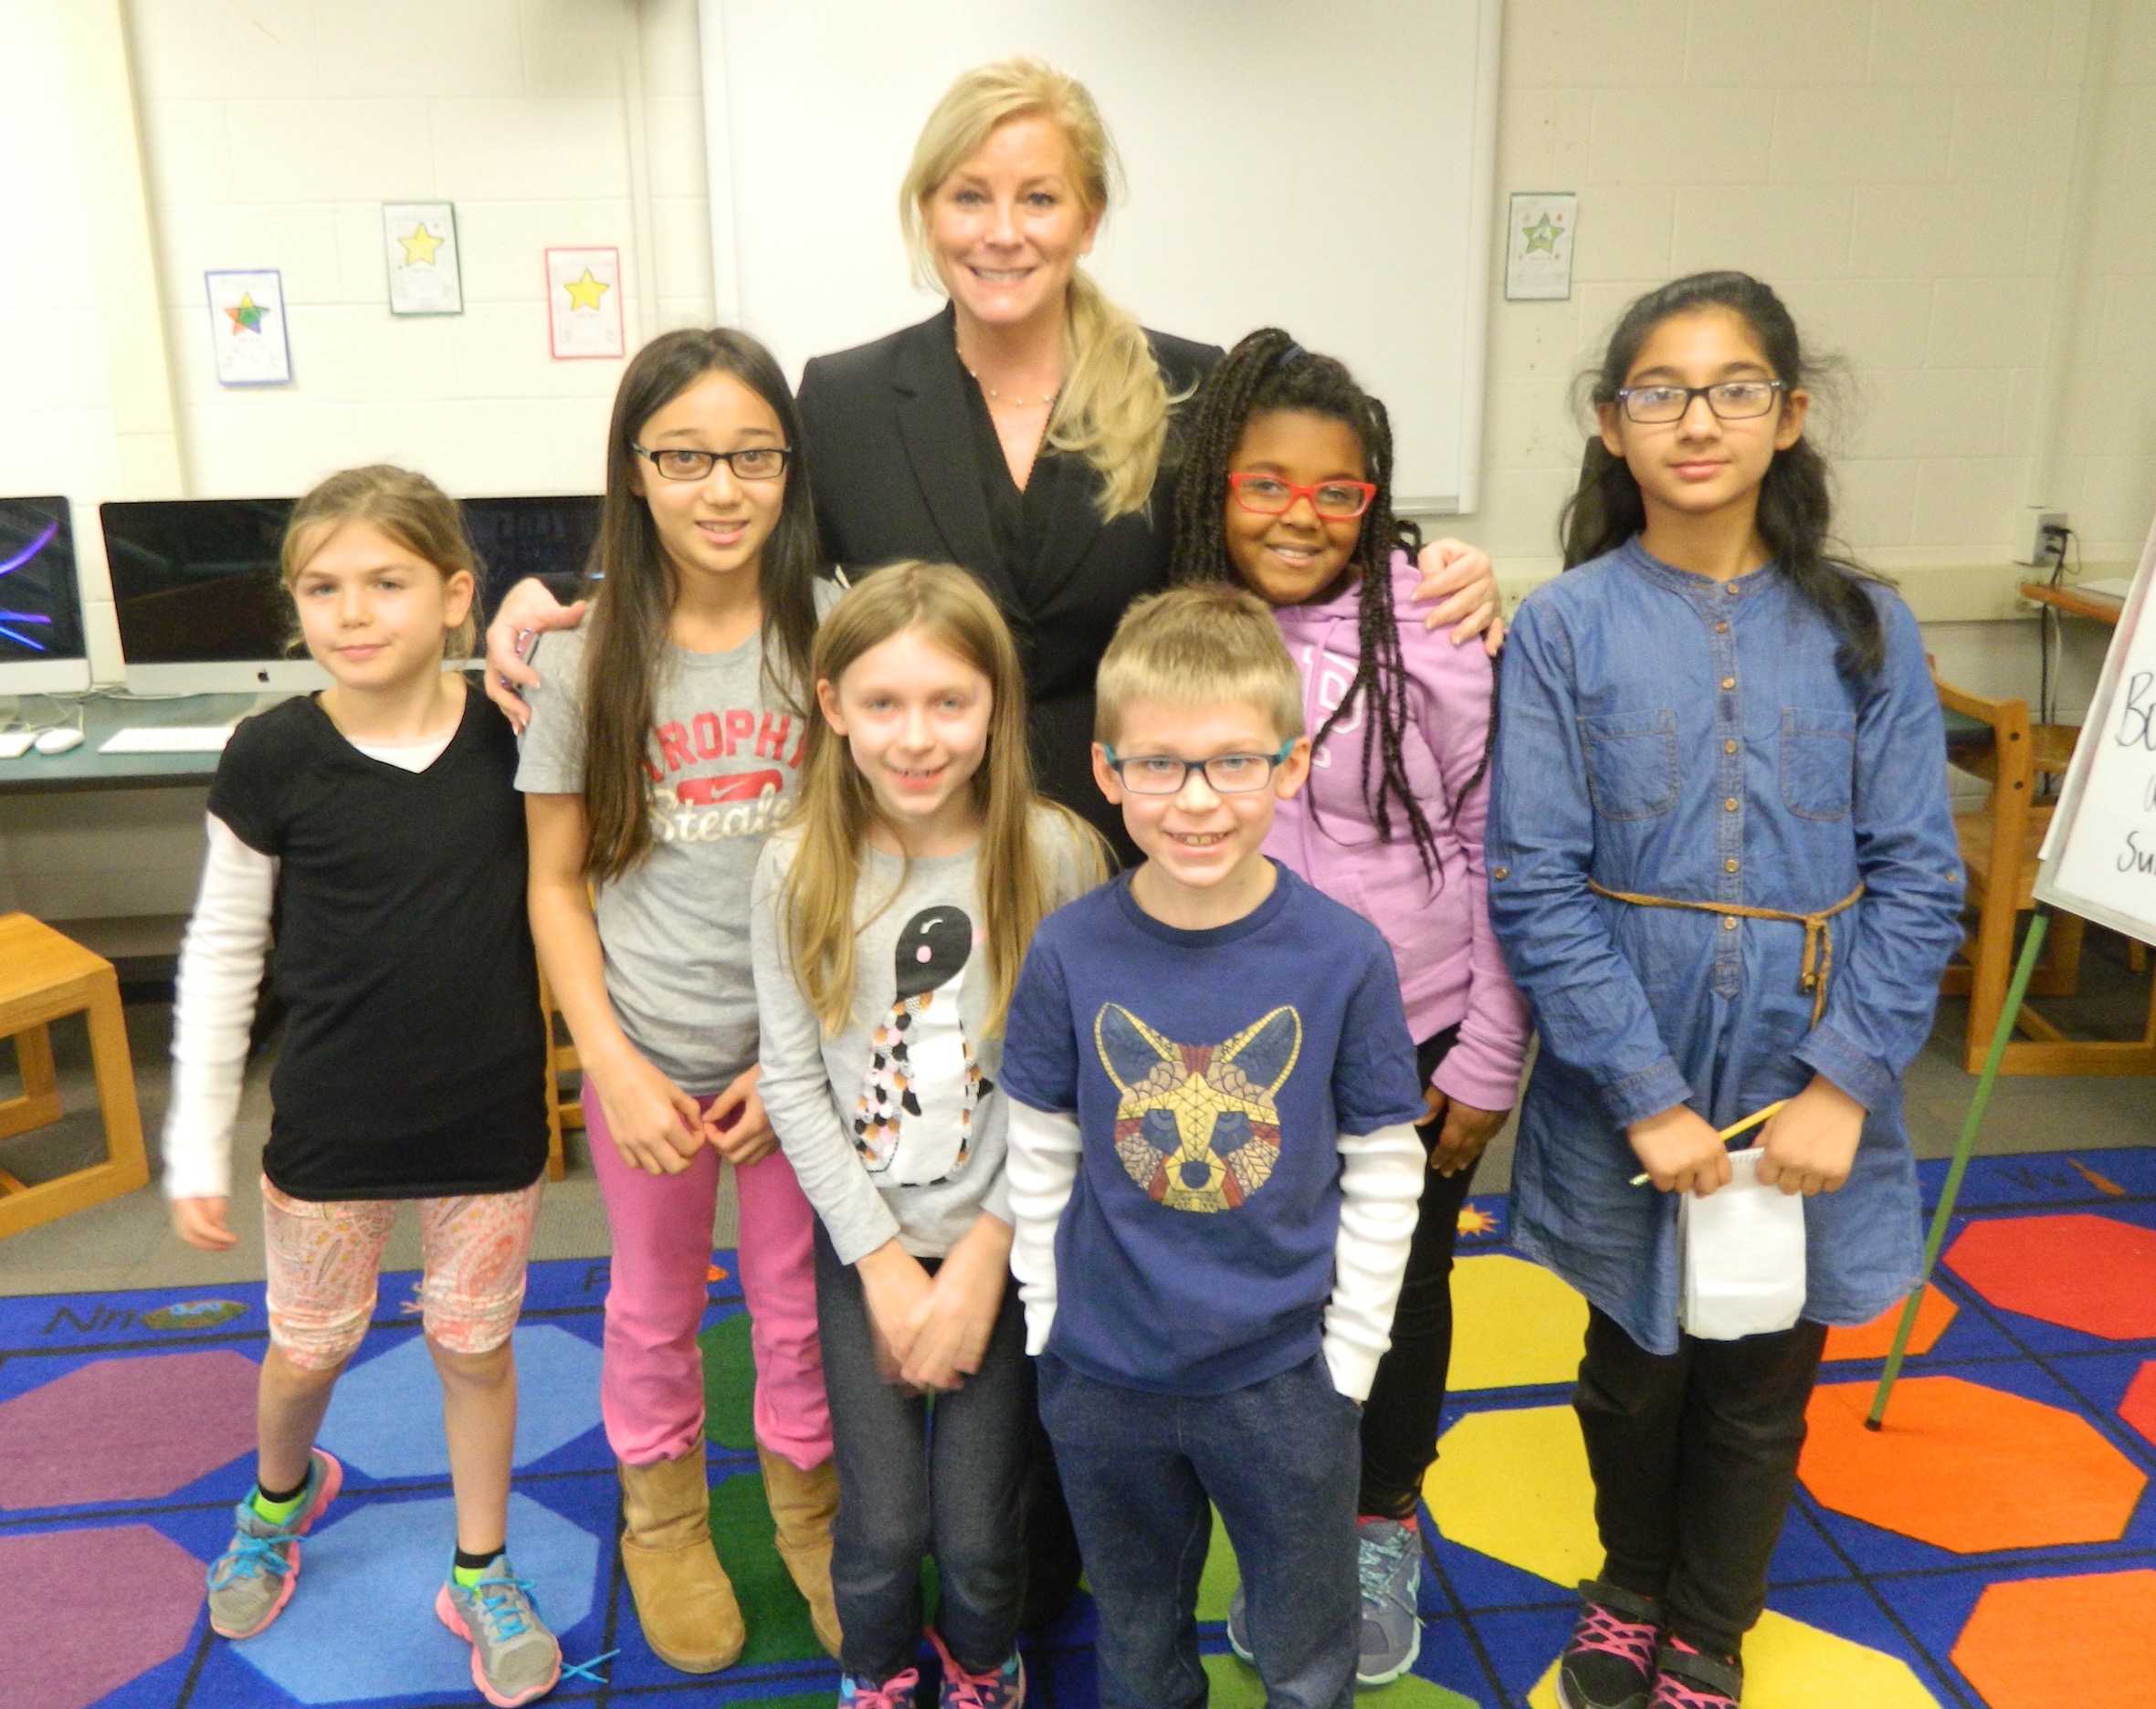 Theresa McGuinness is off to a super start in Watertown – Cunniff Kids News